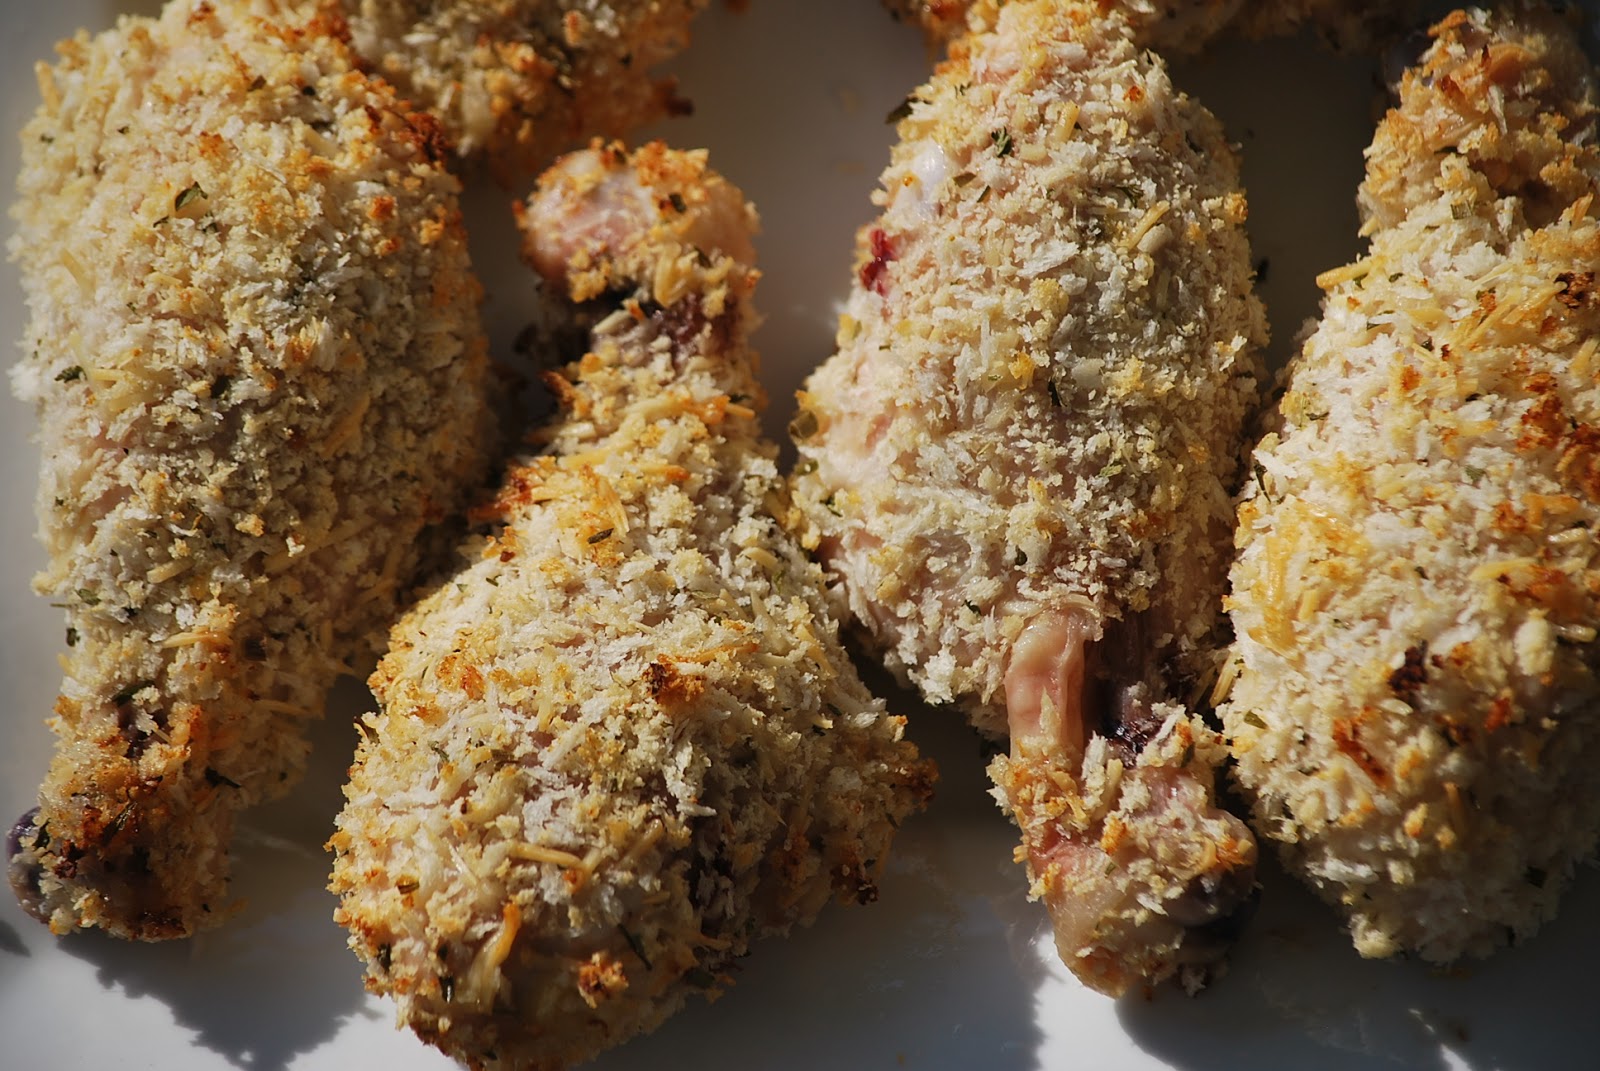 My story in recipes: Panko Crusted Chicken